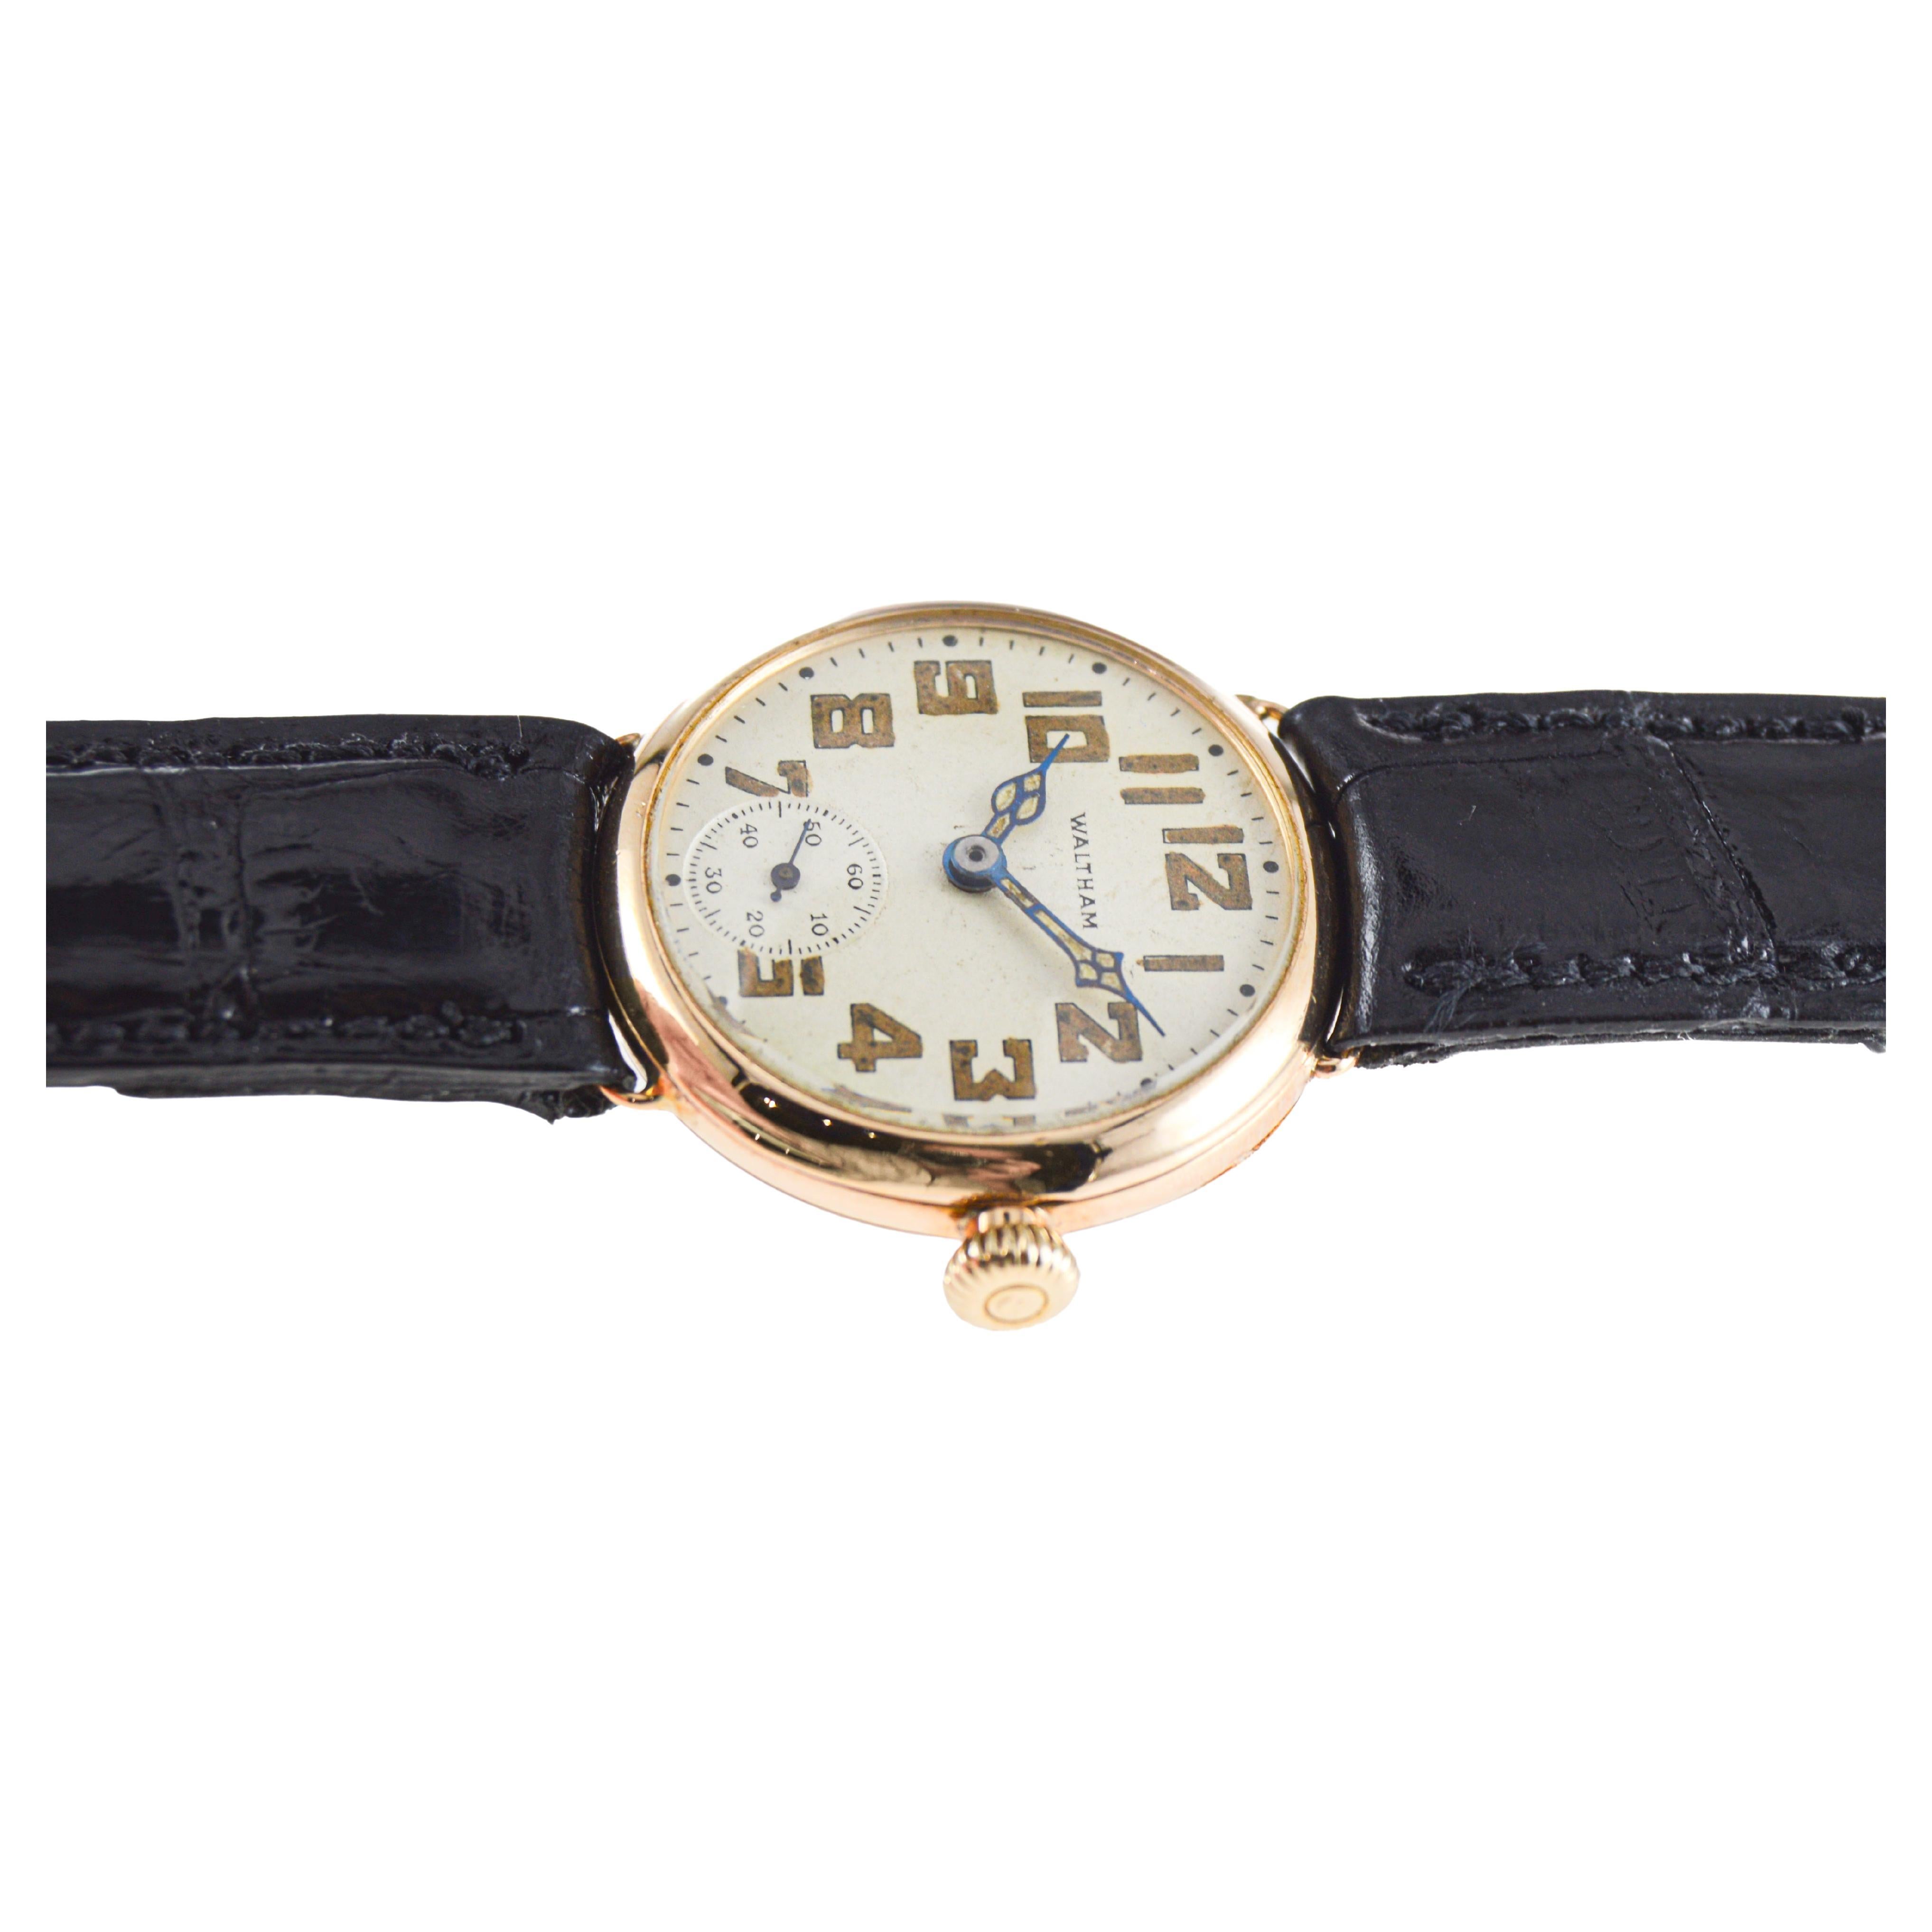 Women's or Men's Waltham 14Kt. Solid Gold Art Deco Watch with Original Dial from 1910  For Sale